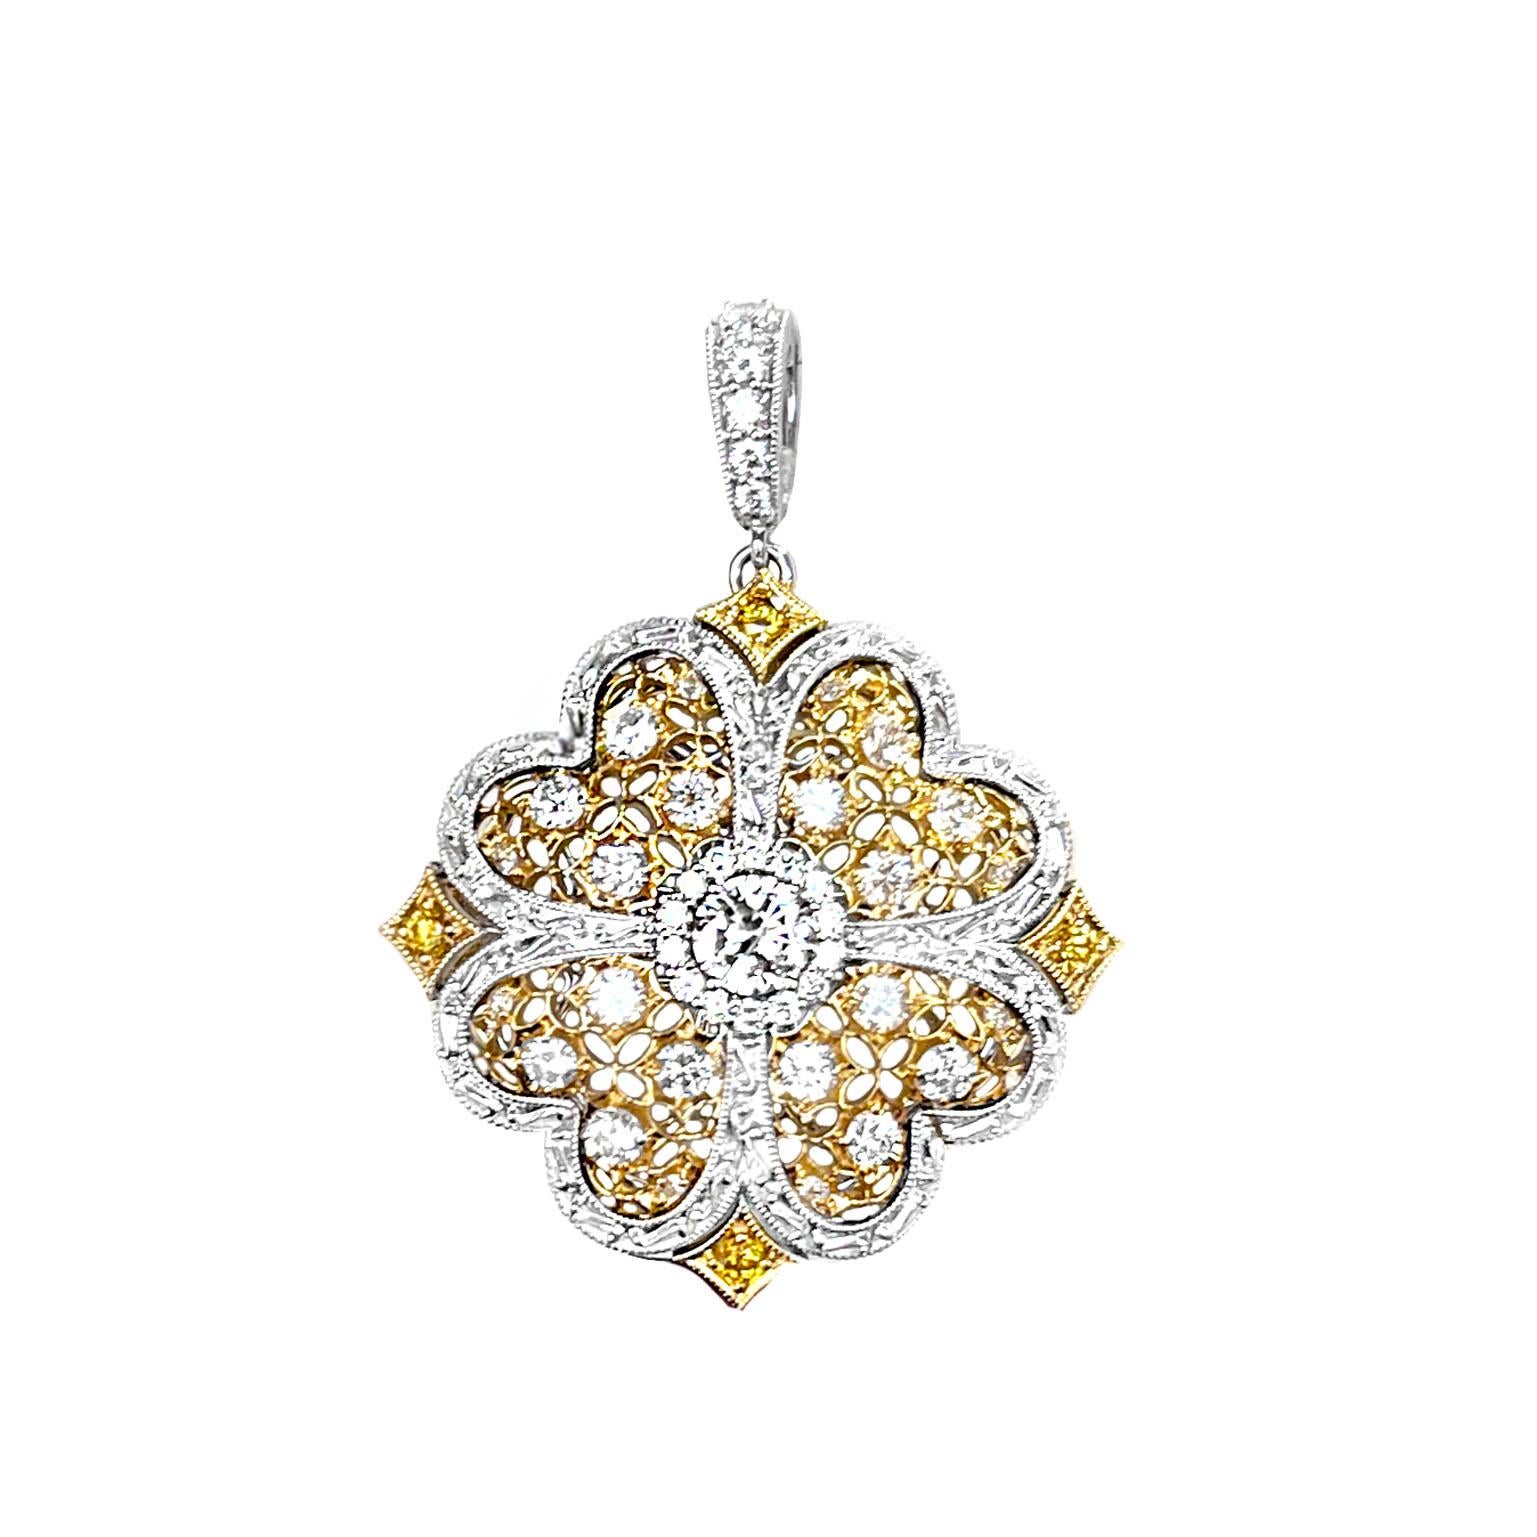 Produced by award winning Italian designer Stefano Vitolo. Stefano creates custom artisanal one of a kind jewelry with excellent gemstones in a truly old world Italian craftmanship.
This diamond pendant has 1.45 carat weight of F/G color and 0.14